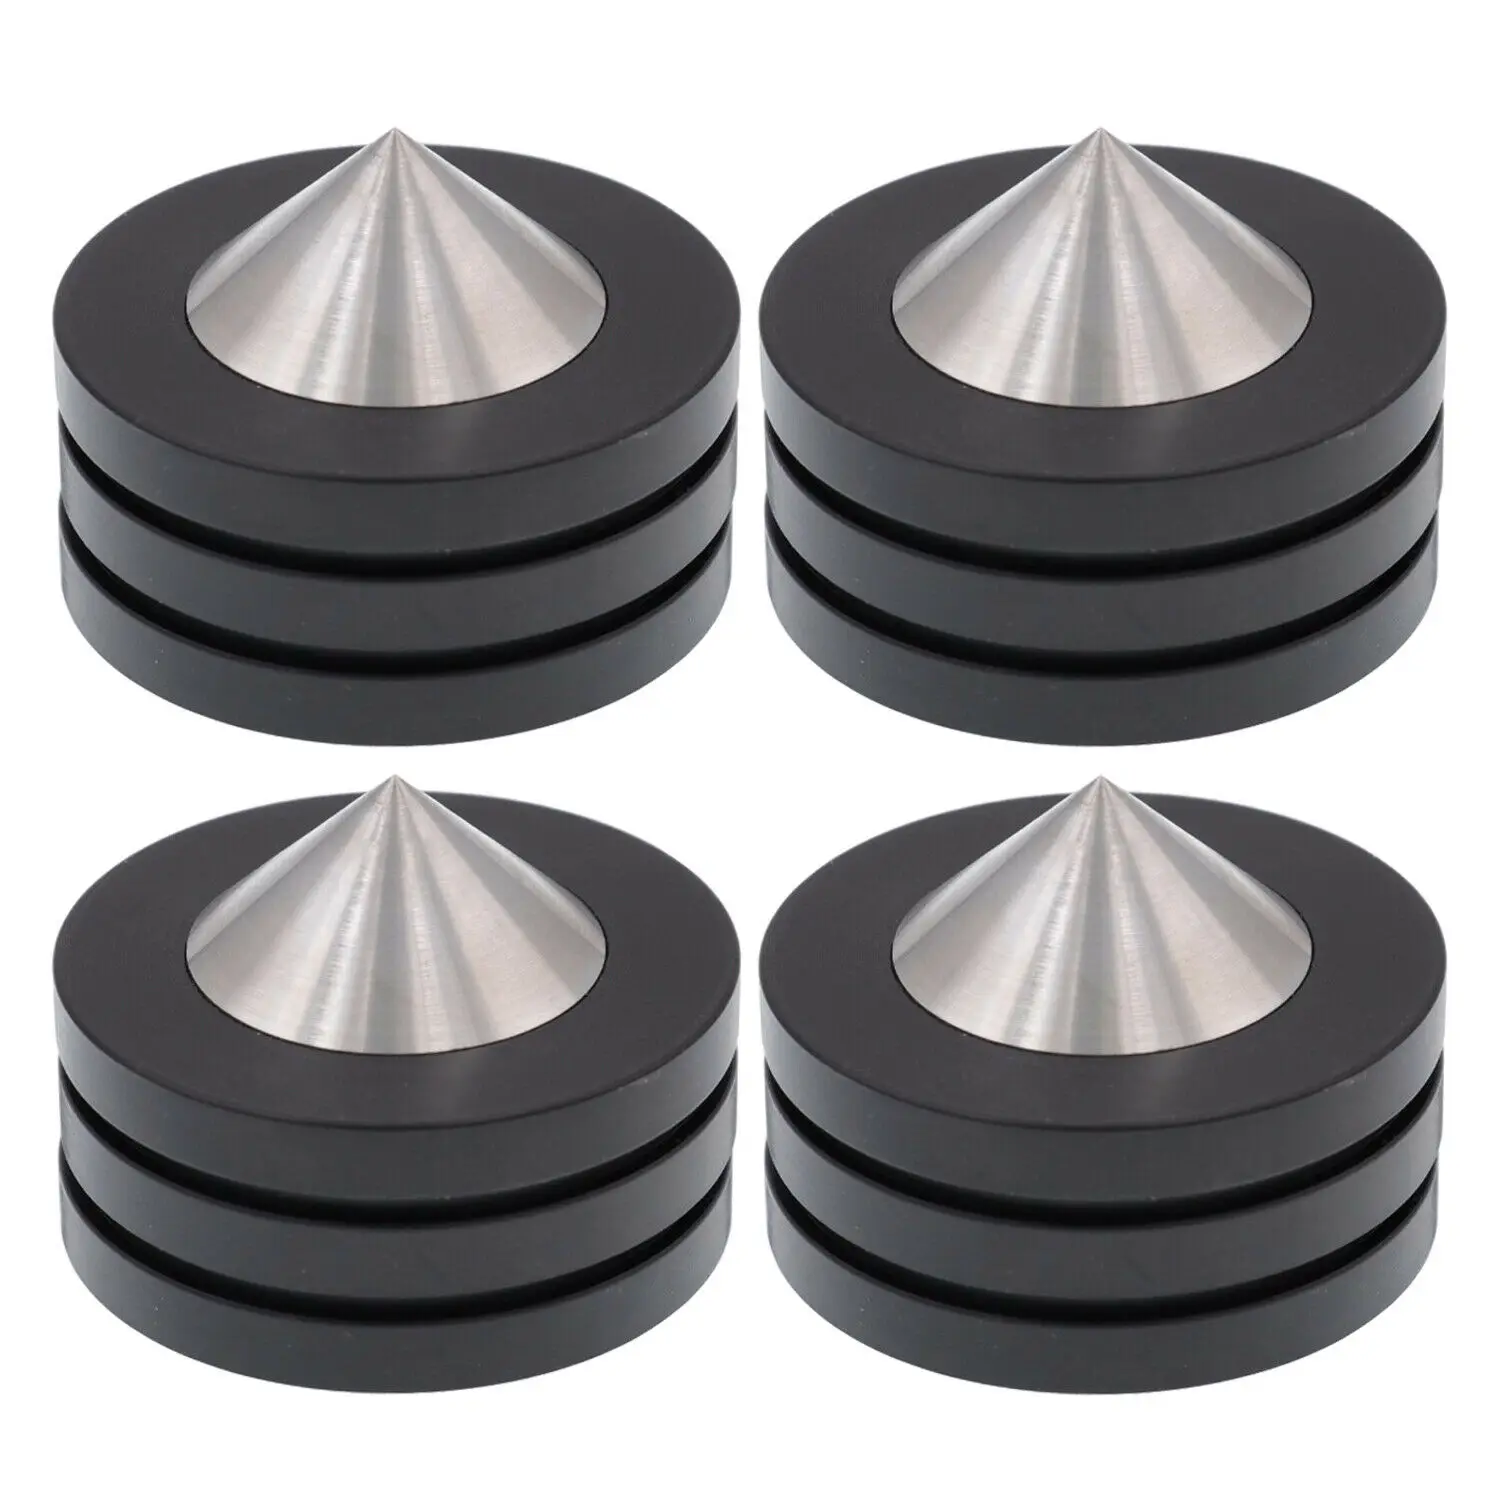 Enlarge 4PCS AUDIO FEET 49x36mm 304 Stainless Steel Graphite Speaker Cabine Amplifier Turntable CD Player Radio DAC Isolation Spike Base